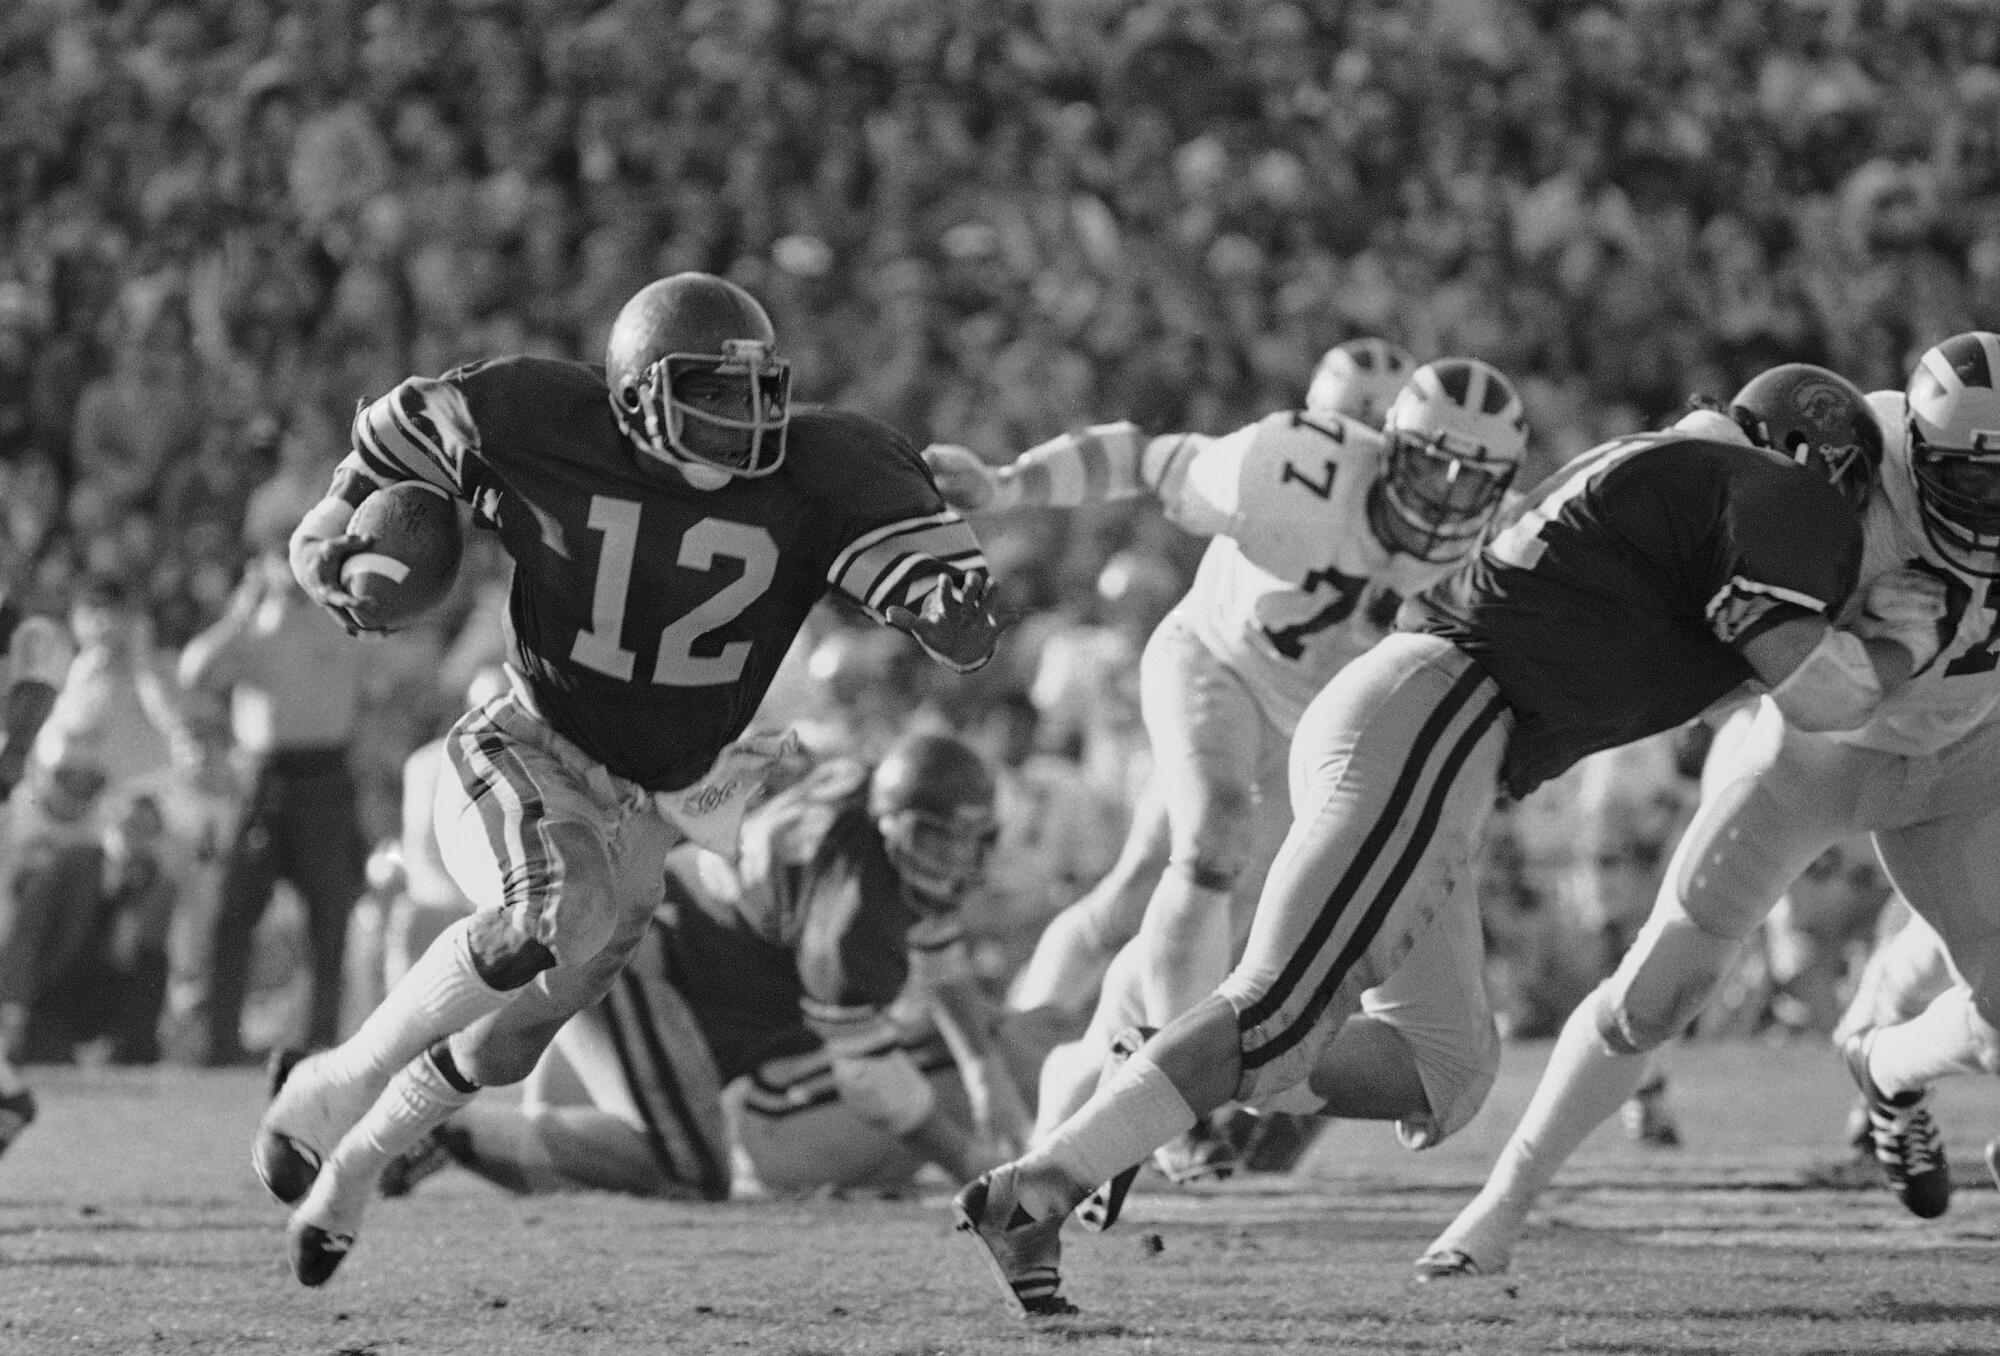 USC tailback Charles White grooves his way past the Michigan defense during the Rose Bowl game in Pasadena.